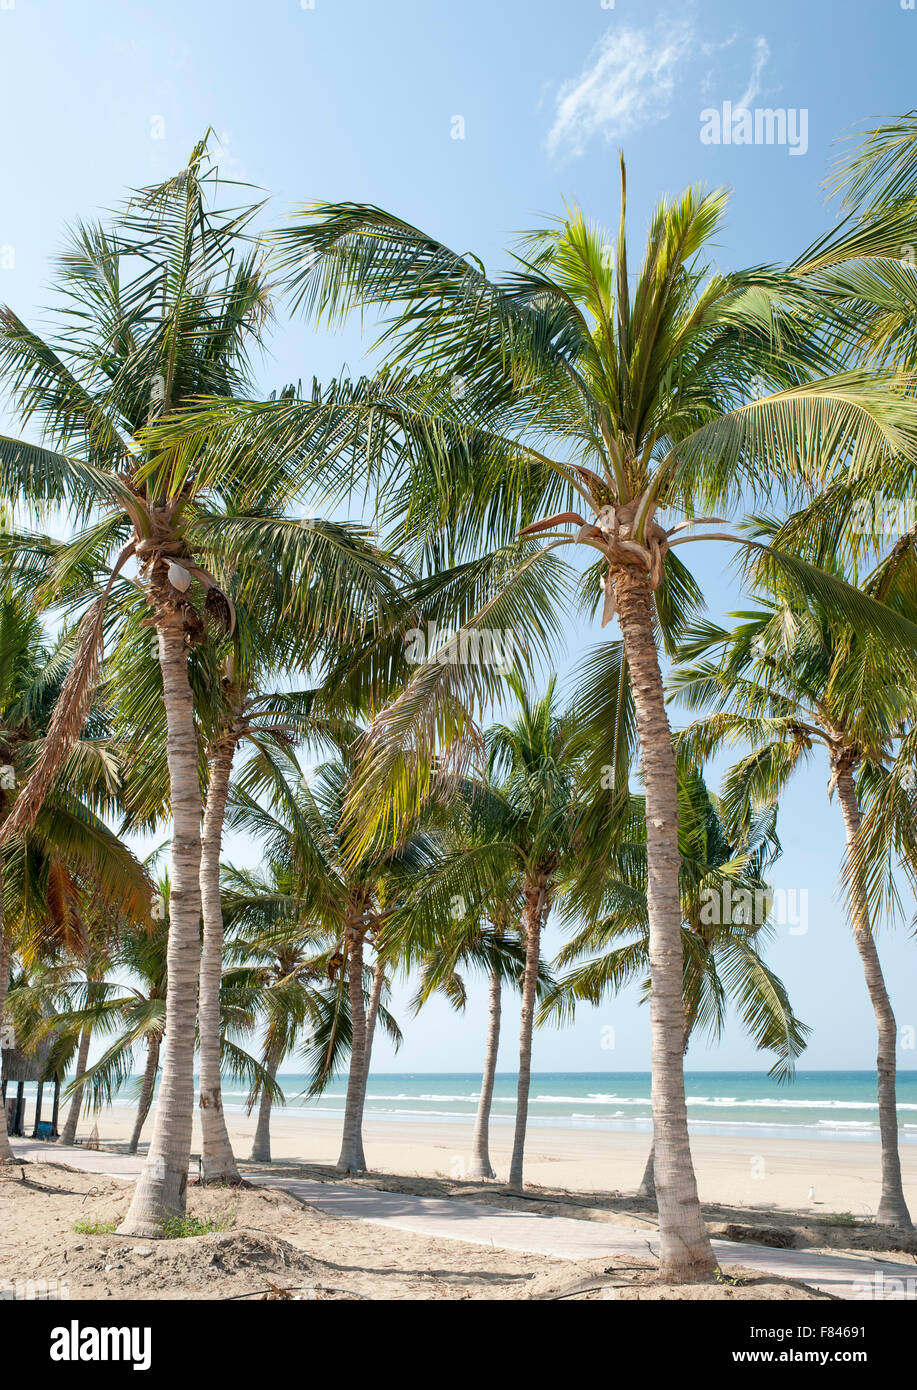 Palm trees lining Qurum beach in Muscat, the capital of the Sultanate of Oman. Stock Photo